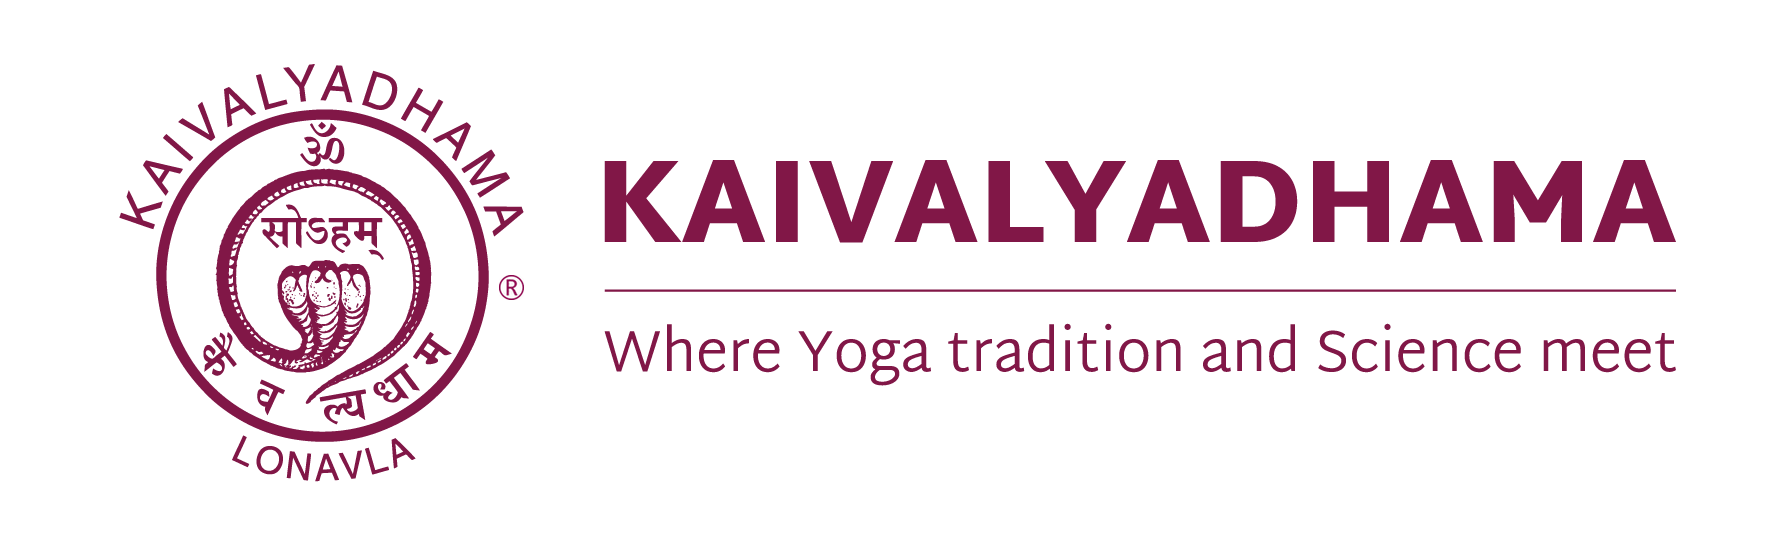 Kaivalyadhama’s 10th International Conference on Yoga and Mental Health